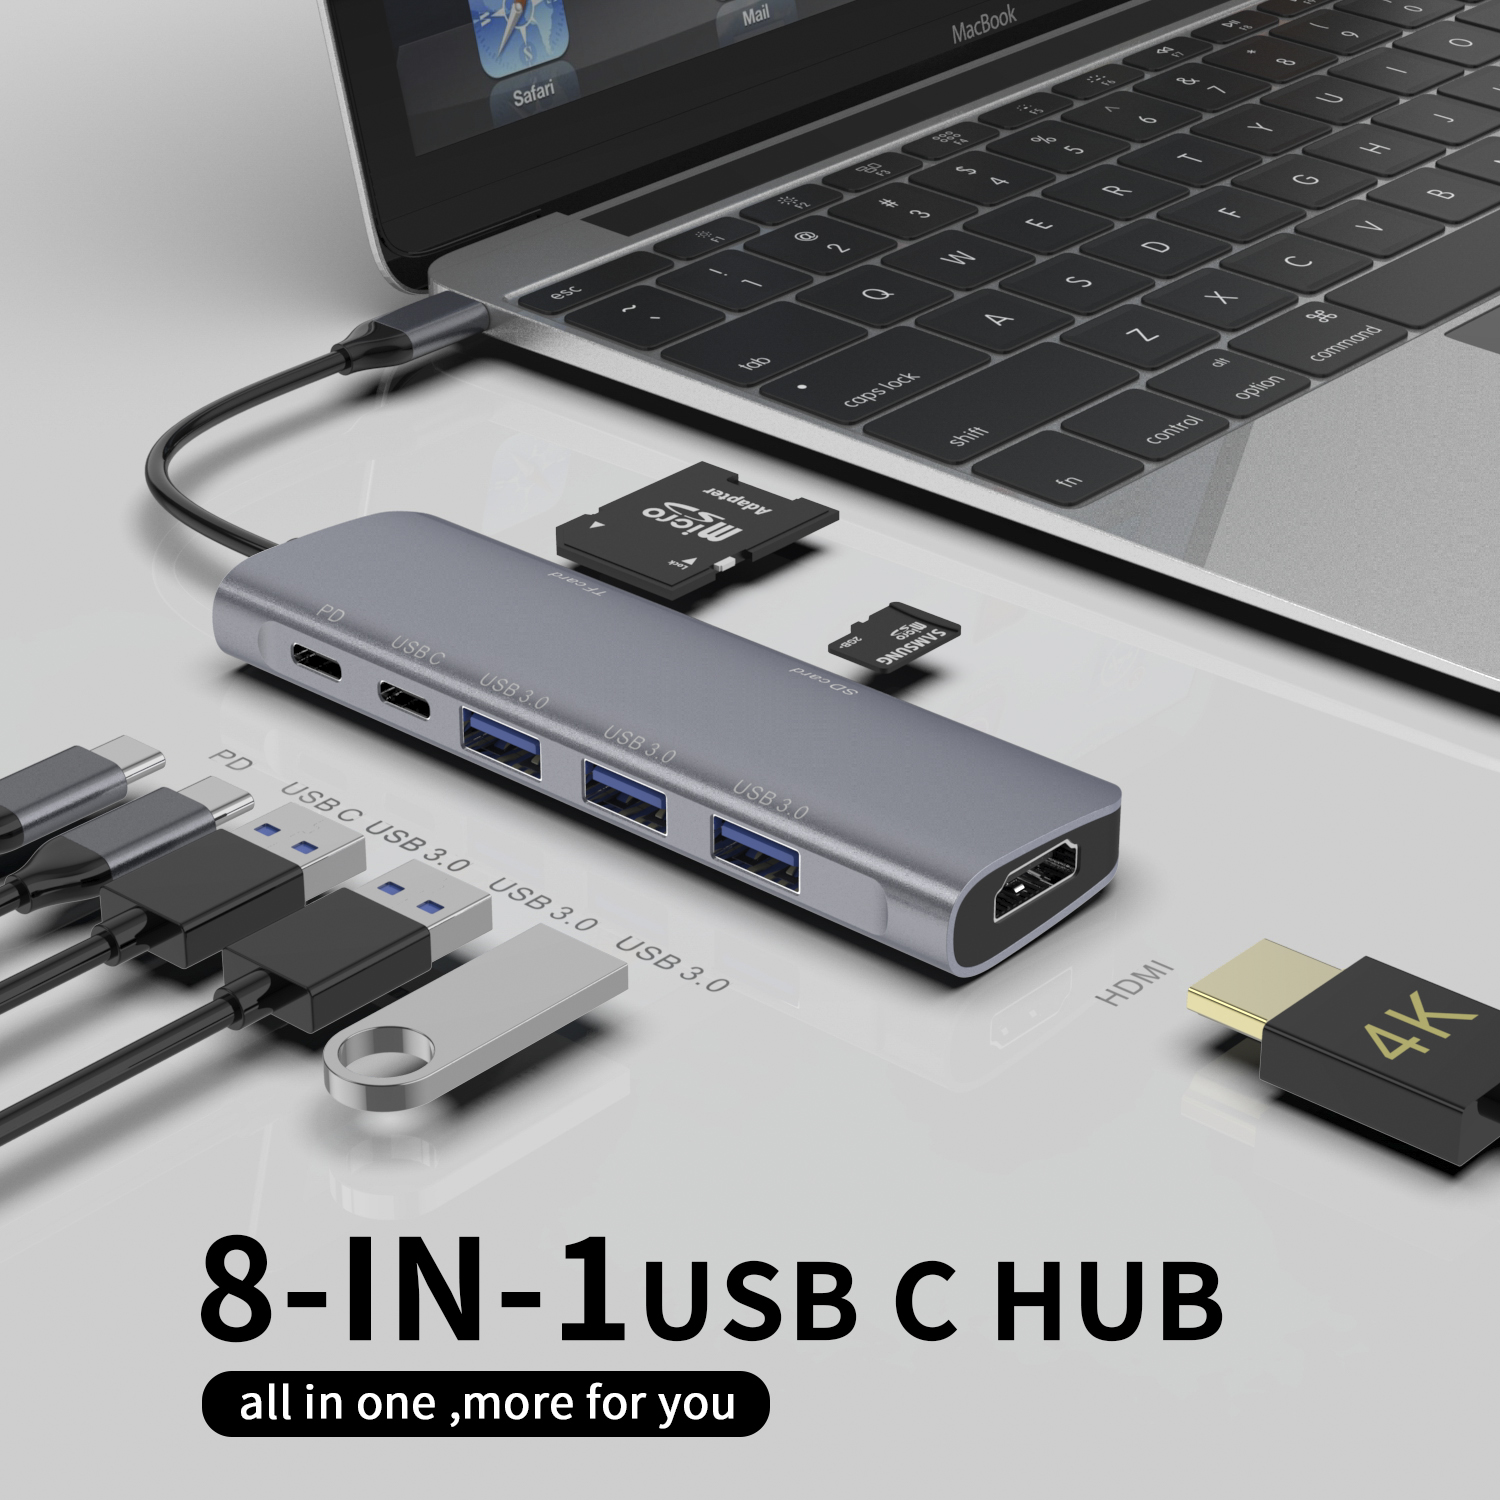 8 IN 1 USB C HUB with HDMI 4K30HZ + PD 100W + Type C Data + 3 x USB A 3.0 +SD +TF card reader slot power charging multiport adapter docking station for laptop macbook